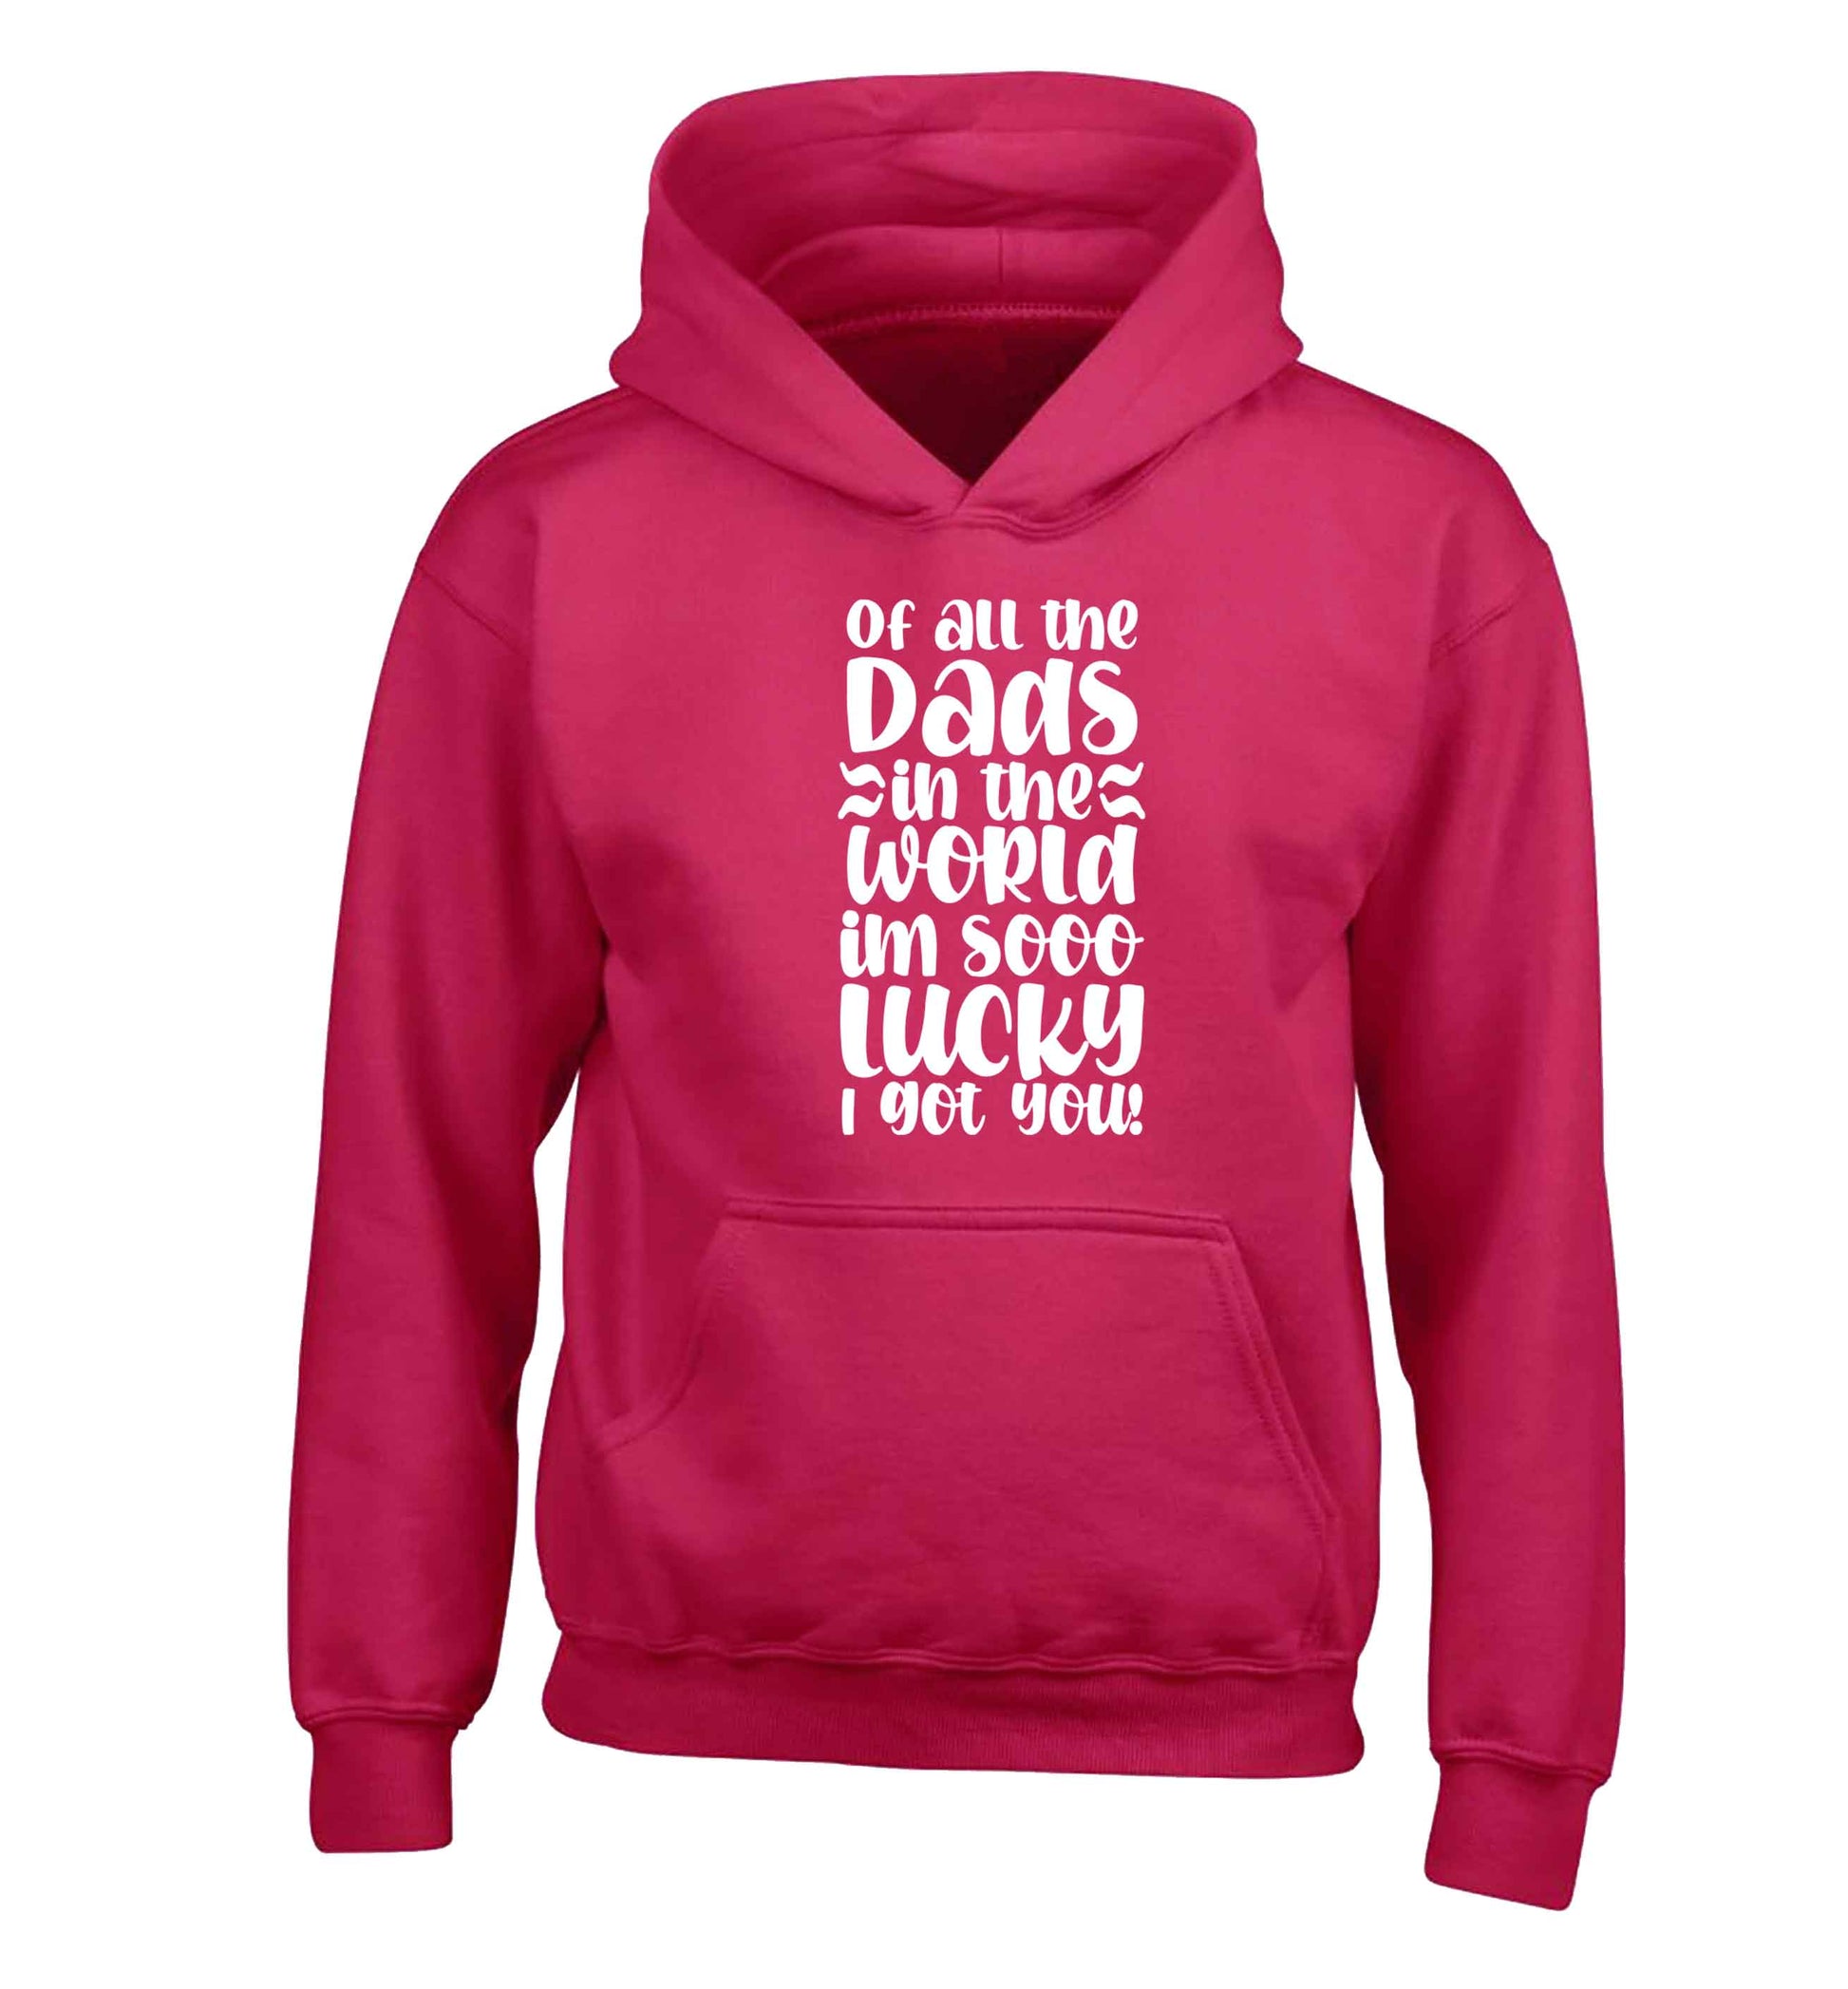 I'm as lucky as can be the worlds greatest dad belongs to me! children's pink hoodie 12-13 Years